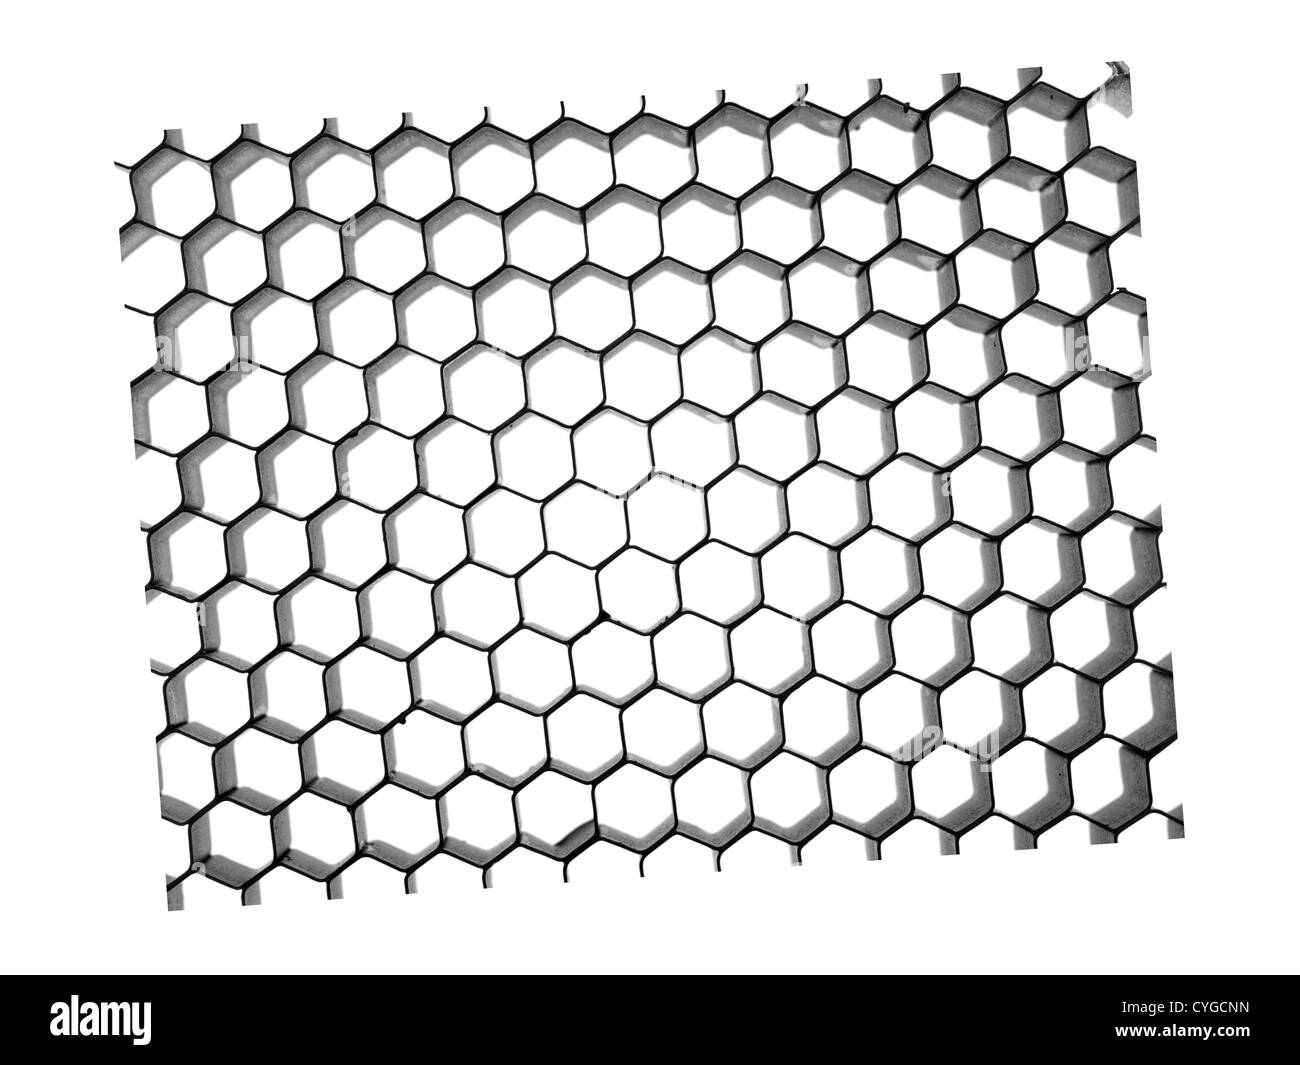 A honeycomb background image over a white background Stock Photo